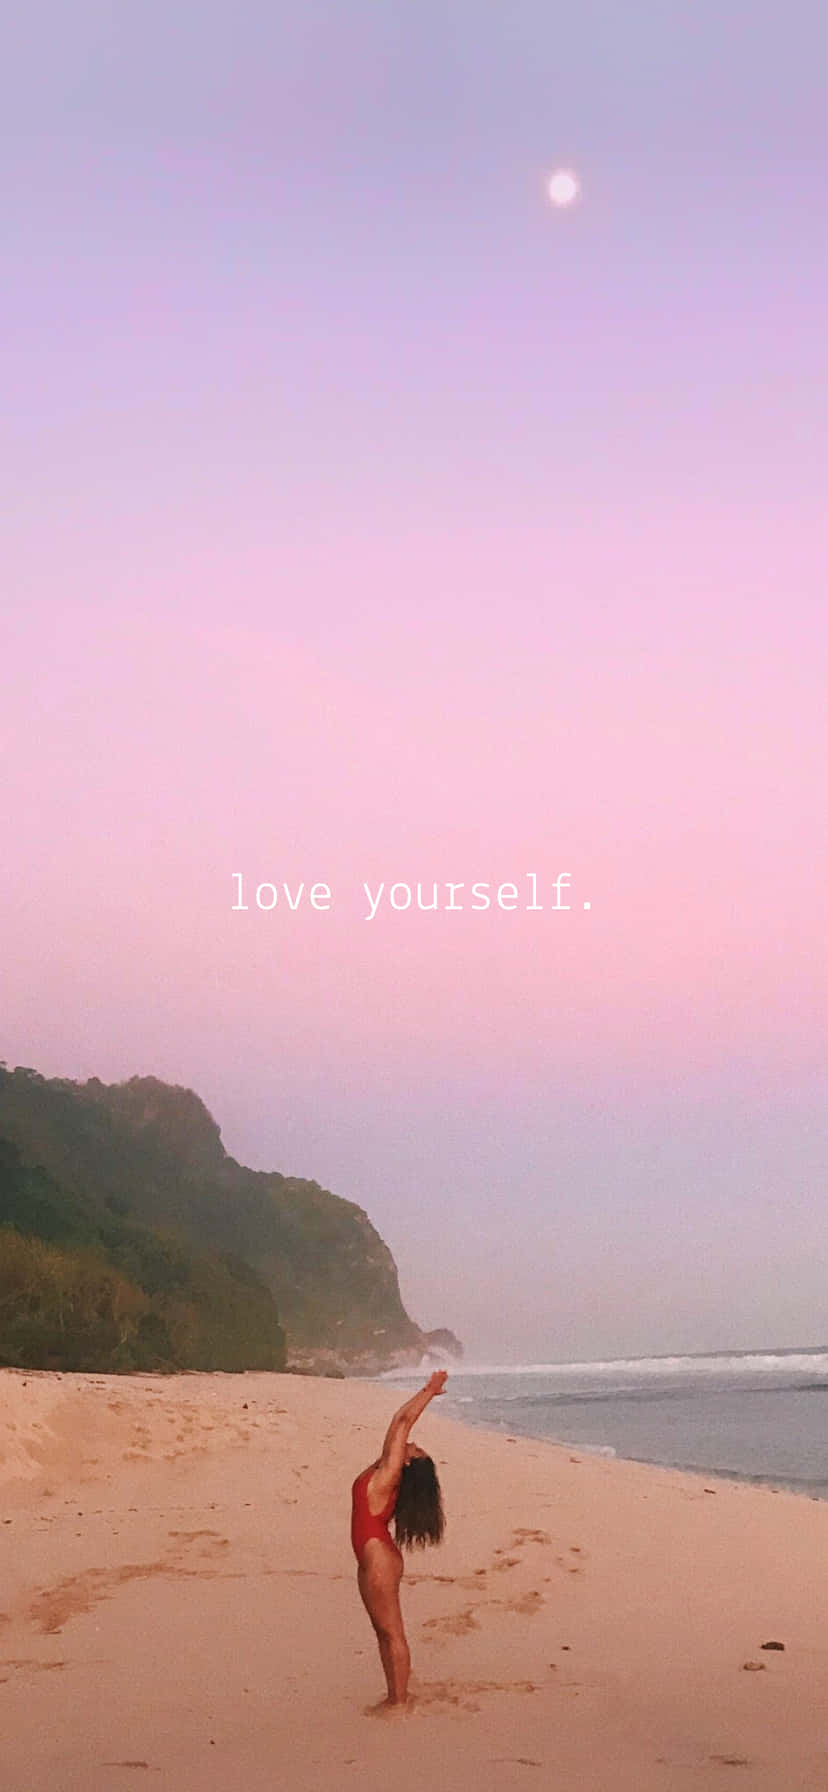 Save These New Self Love iPhone Wallpapers  Mash Elle